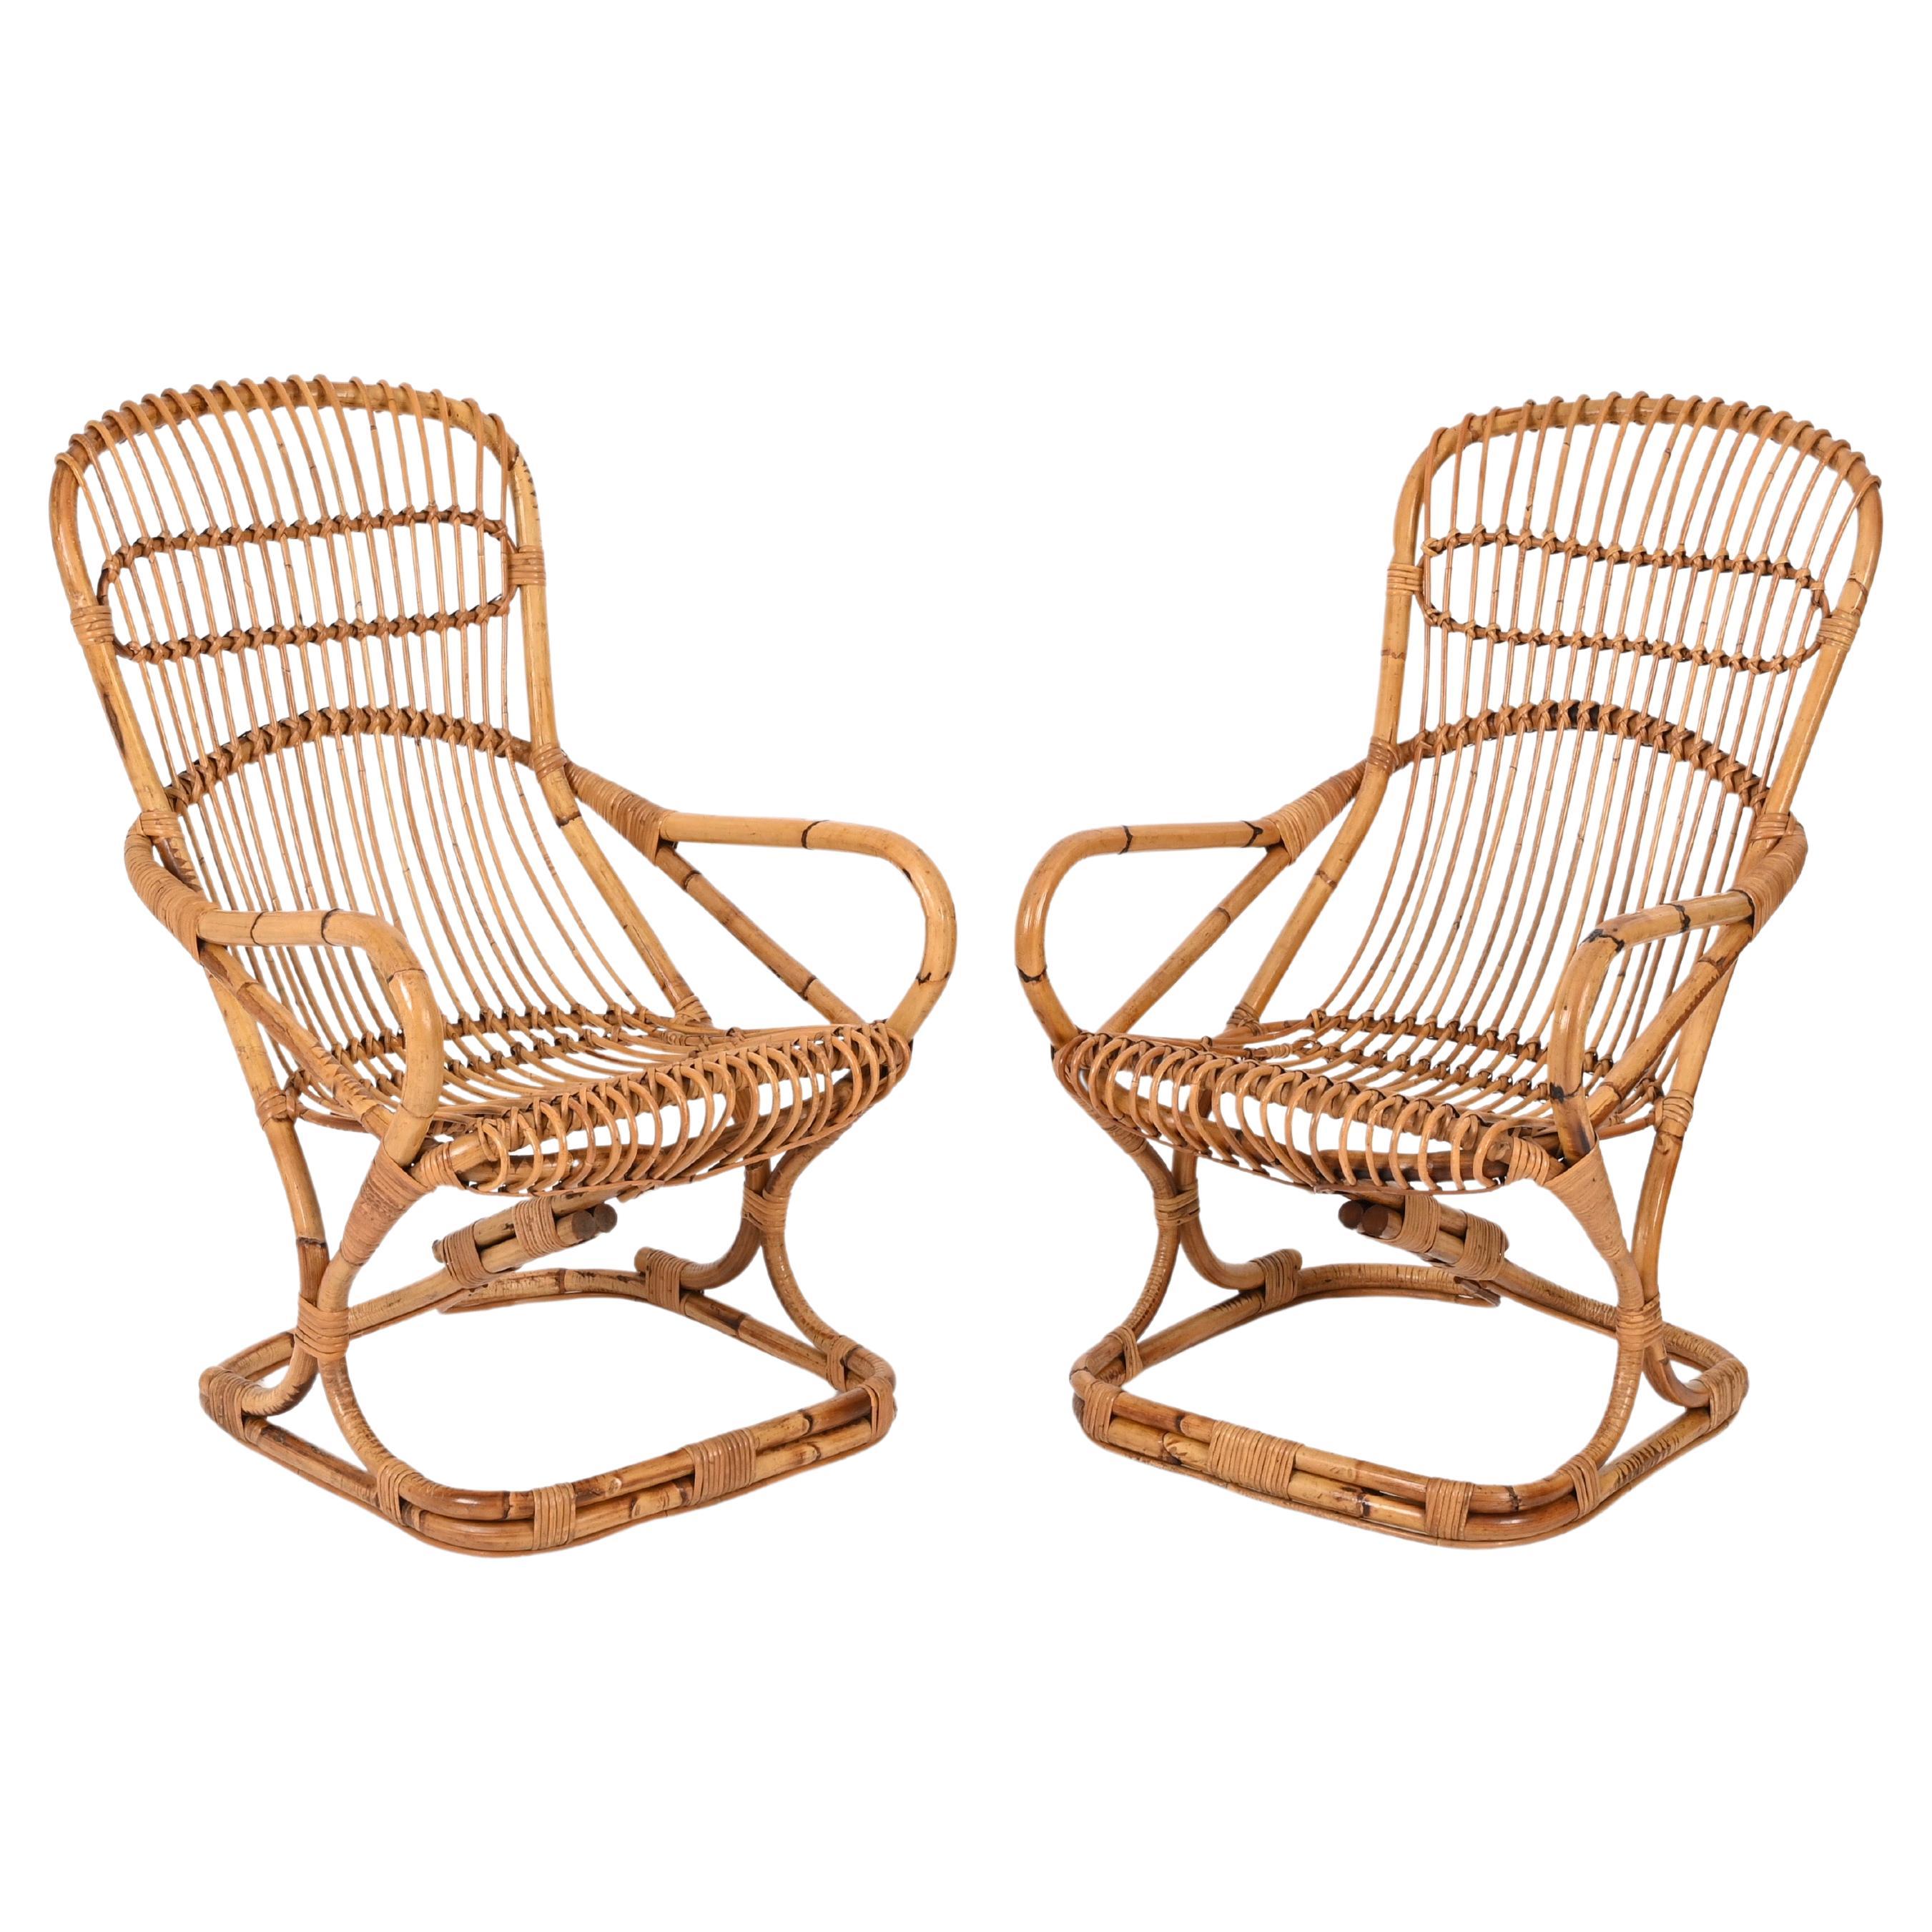 Pair of Midcentury Italian Wicker and Rattan Armchairs by Tito Agnoli, 1960s